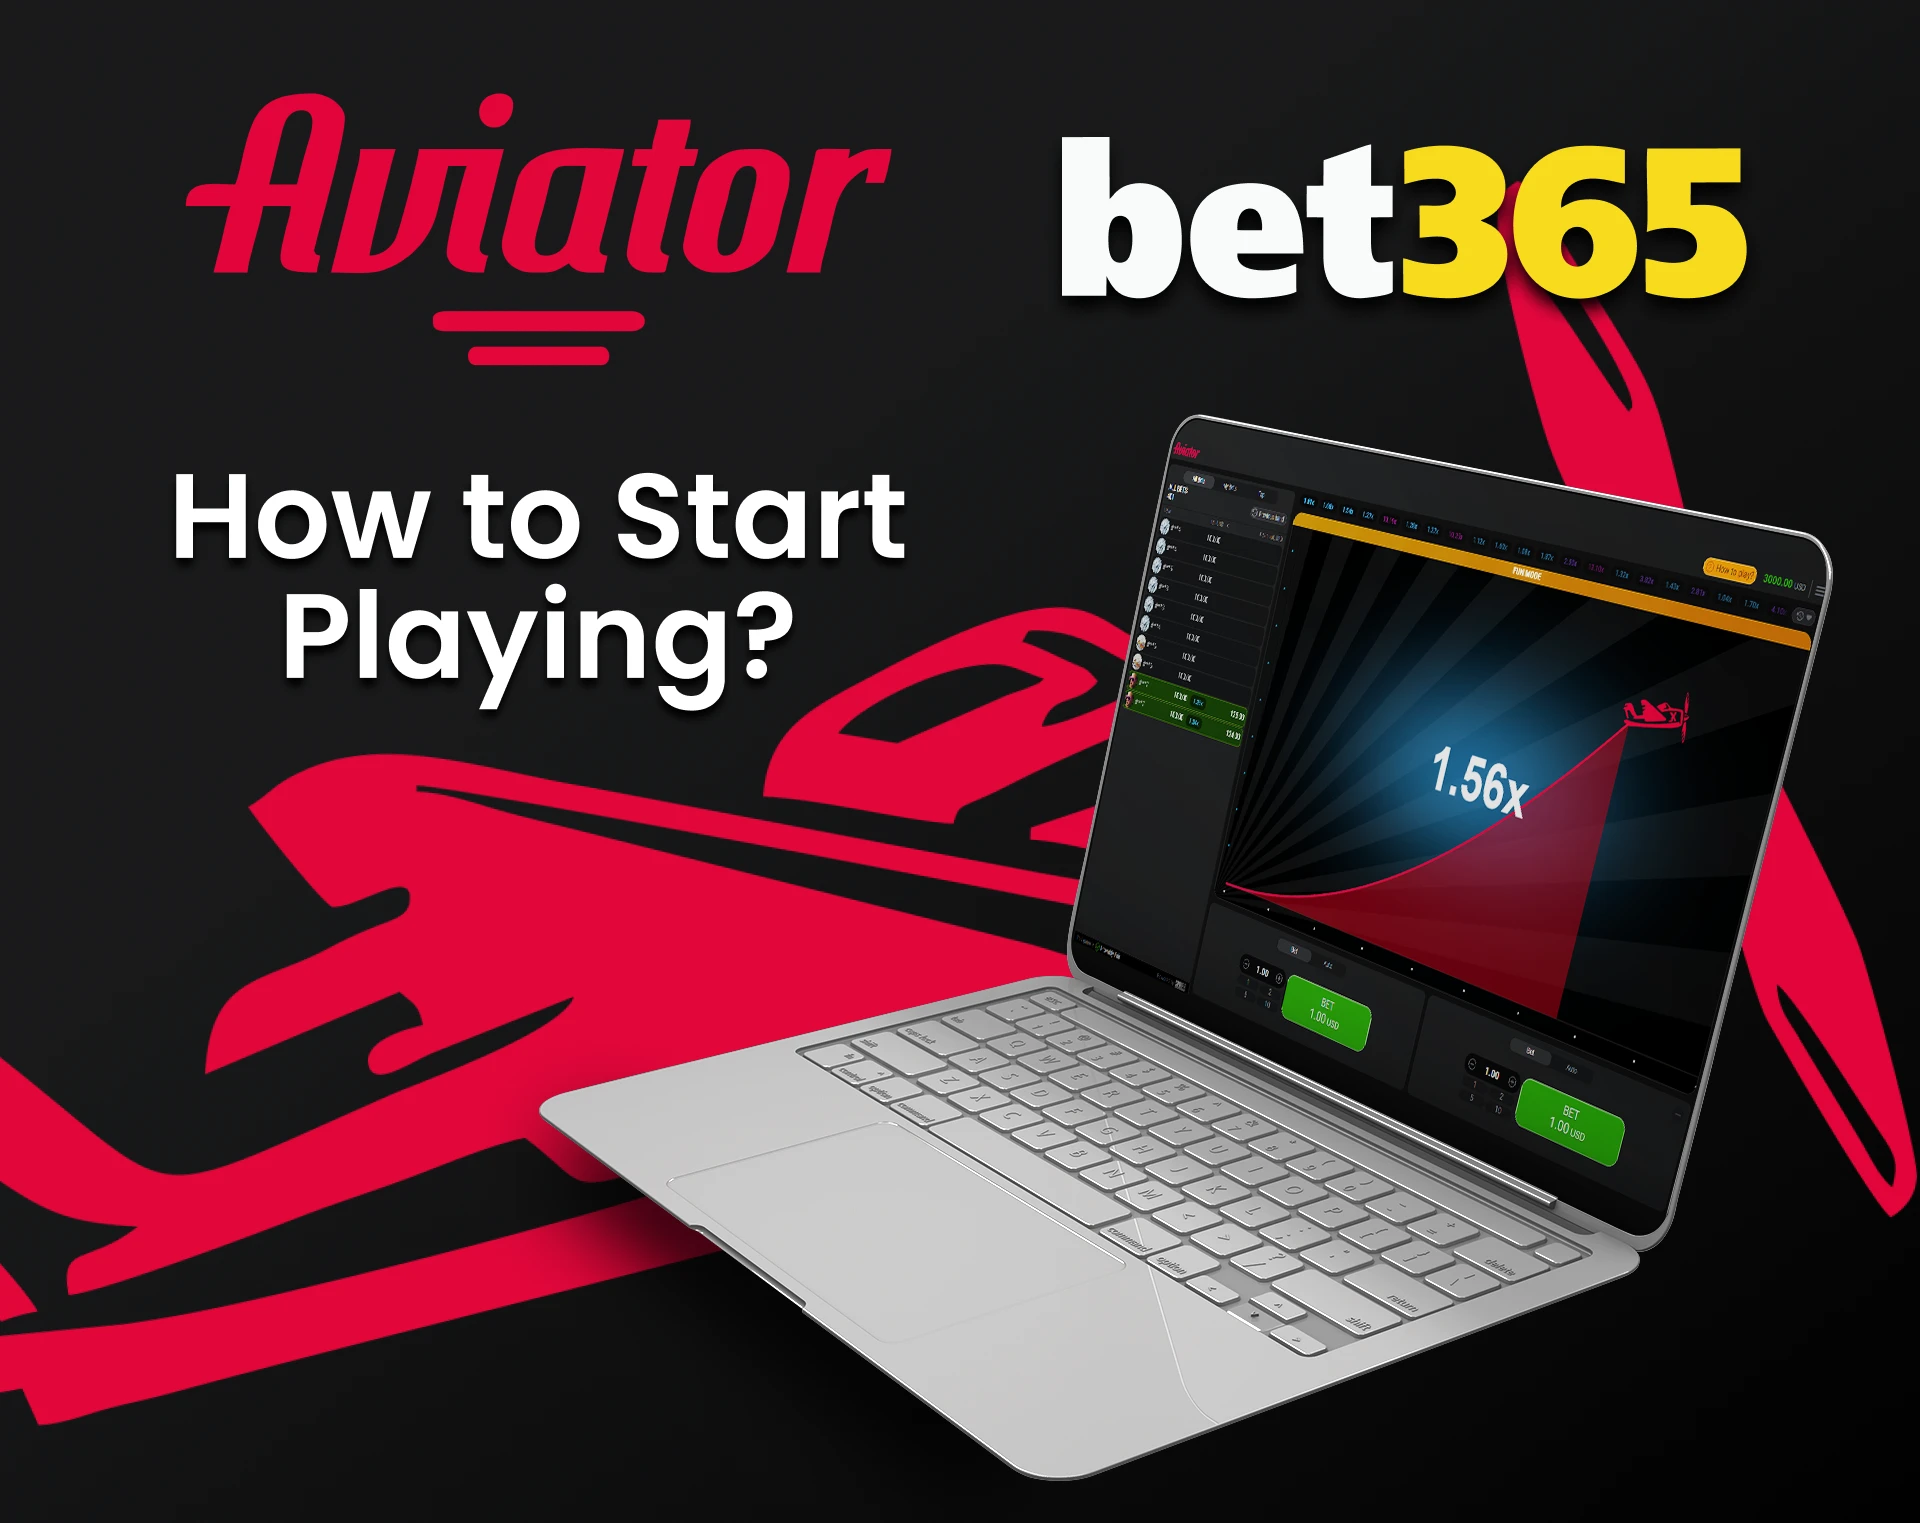 Go to the games section to play Aviator on Bet365.